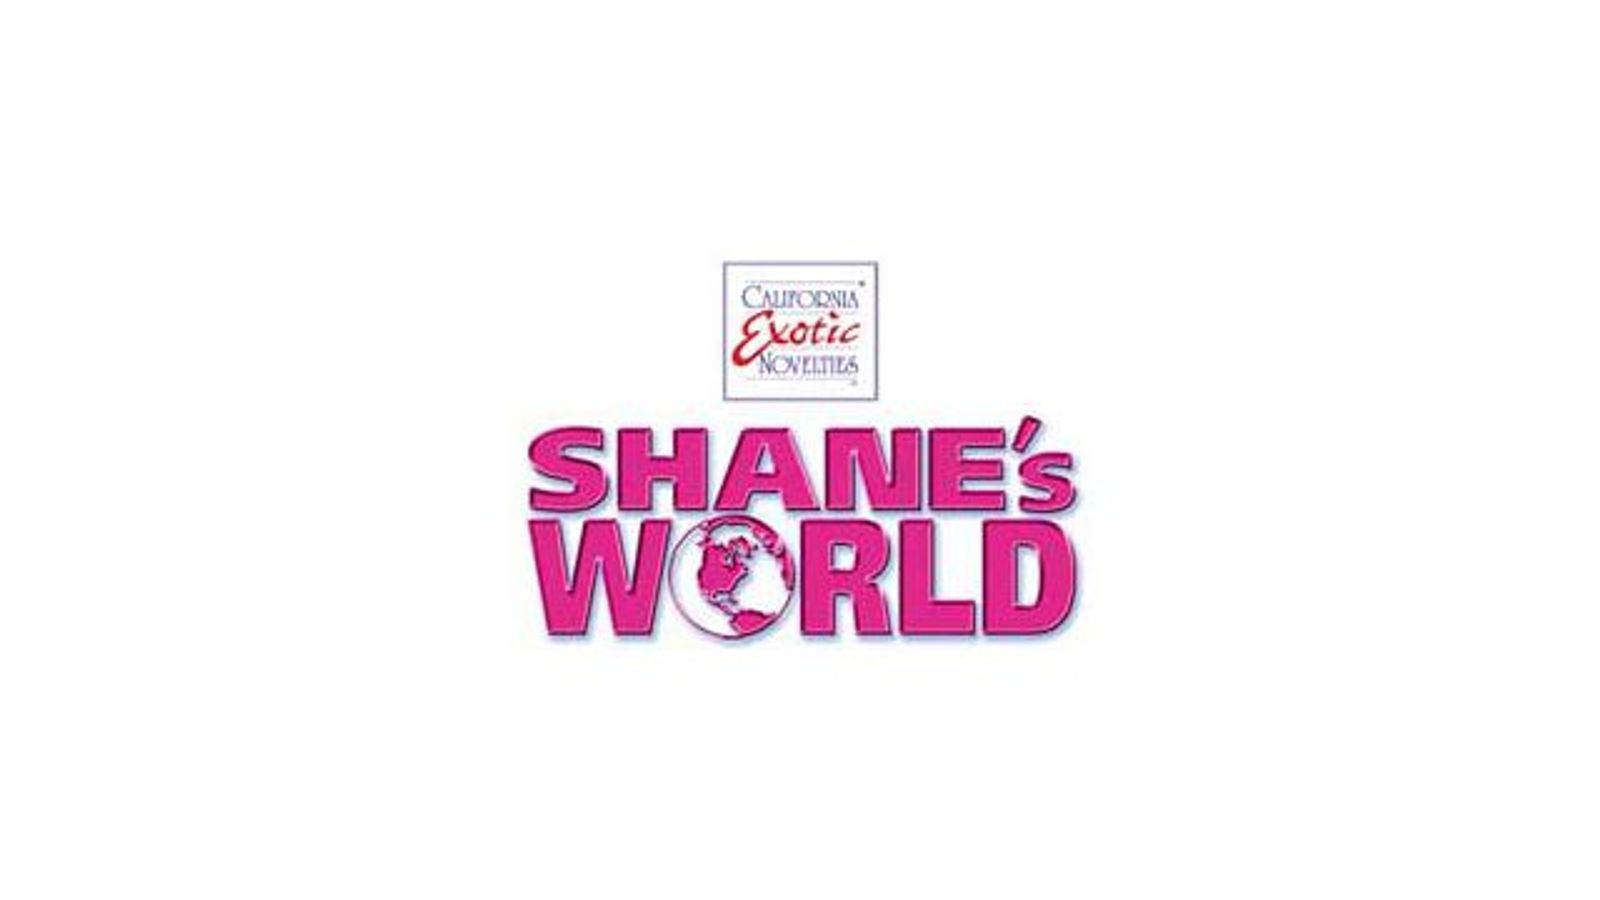 Shane's World Toys Featured in Popular Web Series